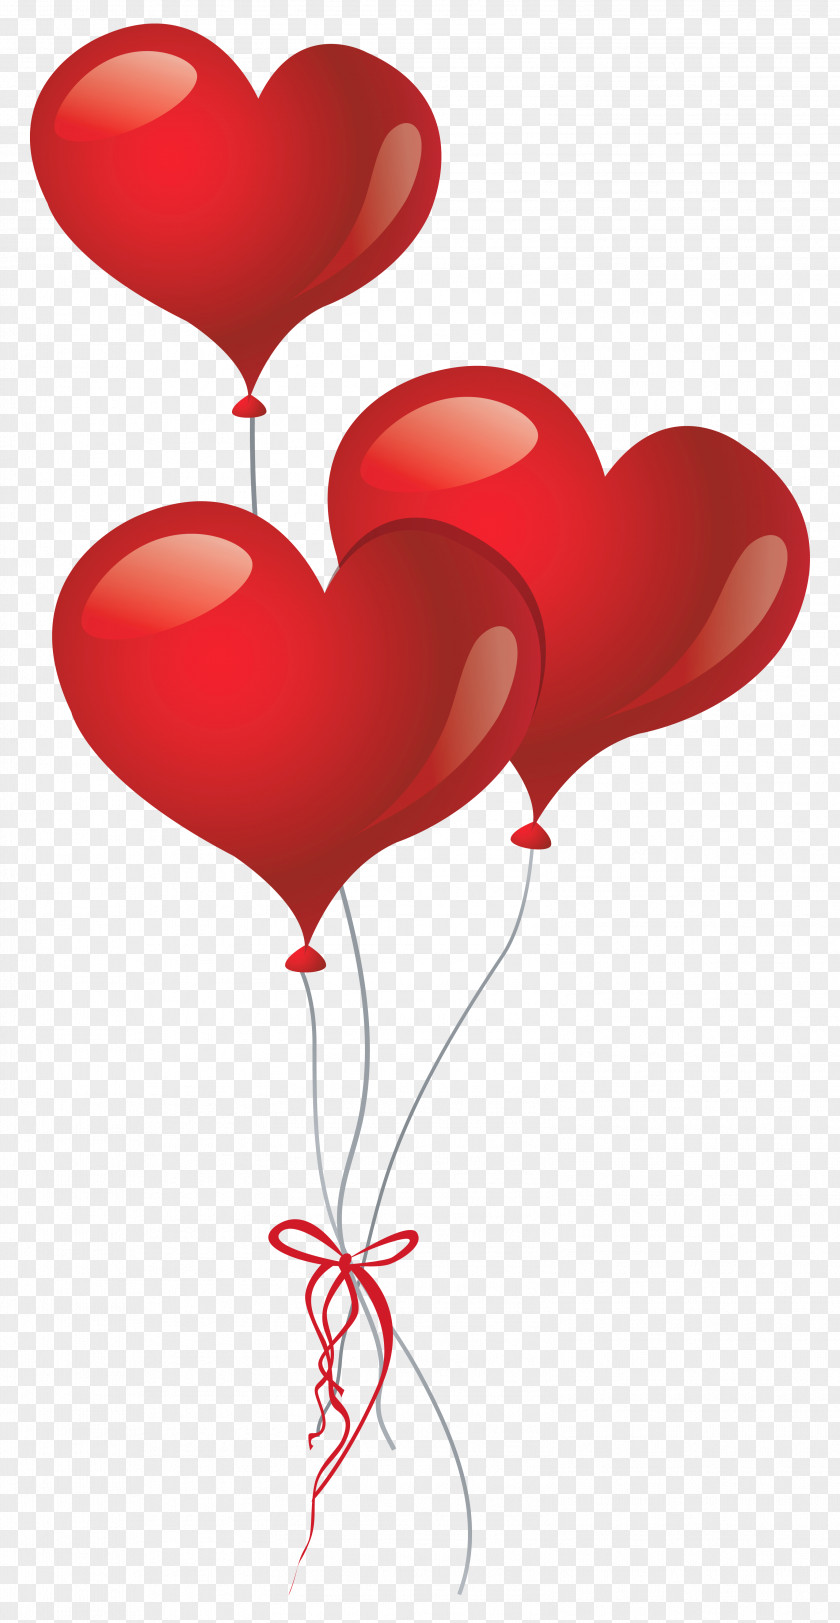 Balloon Love Balloons Heart-shaped Valentine's Day PNG